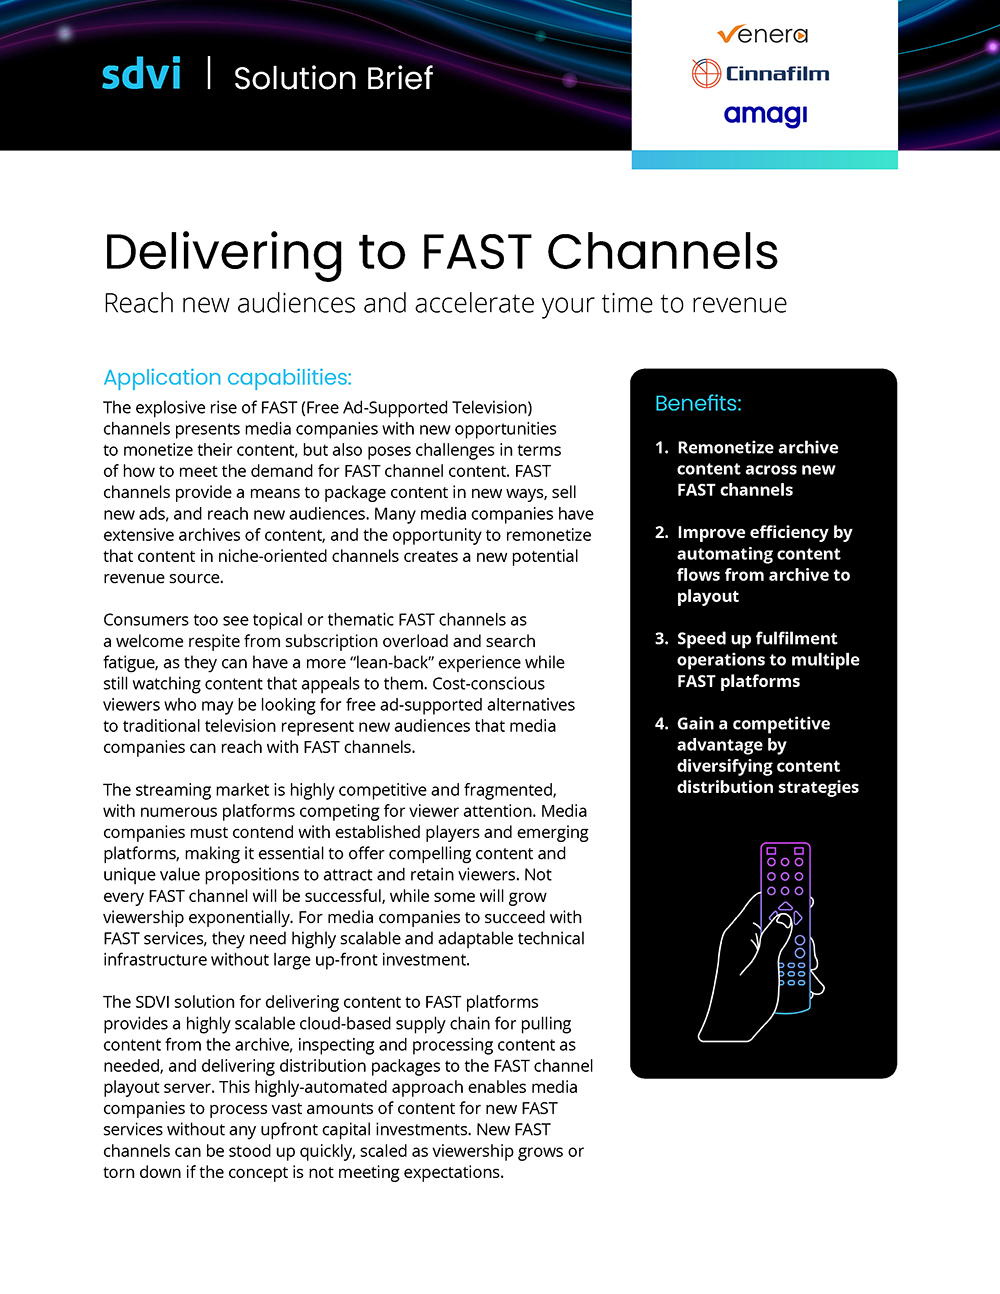 FAST Channel Solution Brief Front Page With SDVI, Amagi, Cloudfirst.io, And Cinnafilm